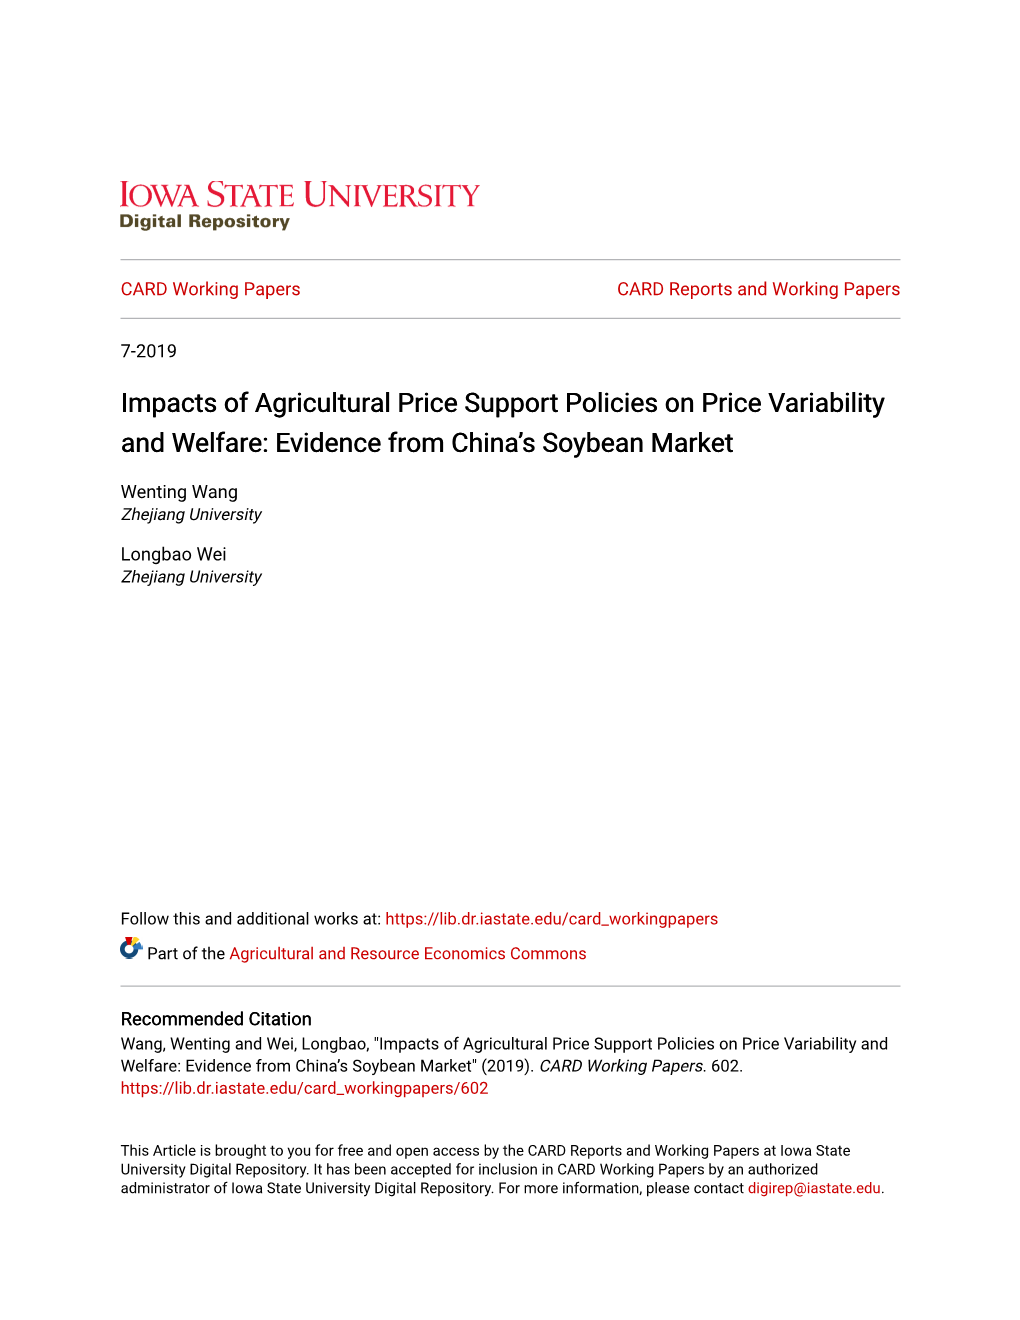 Impacts of Agricultural Price Support Policies on Price Variability and Welfare: Evidence from China’S Soybean Market